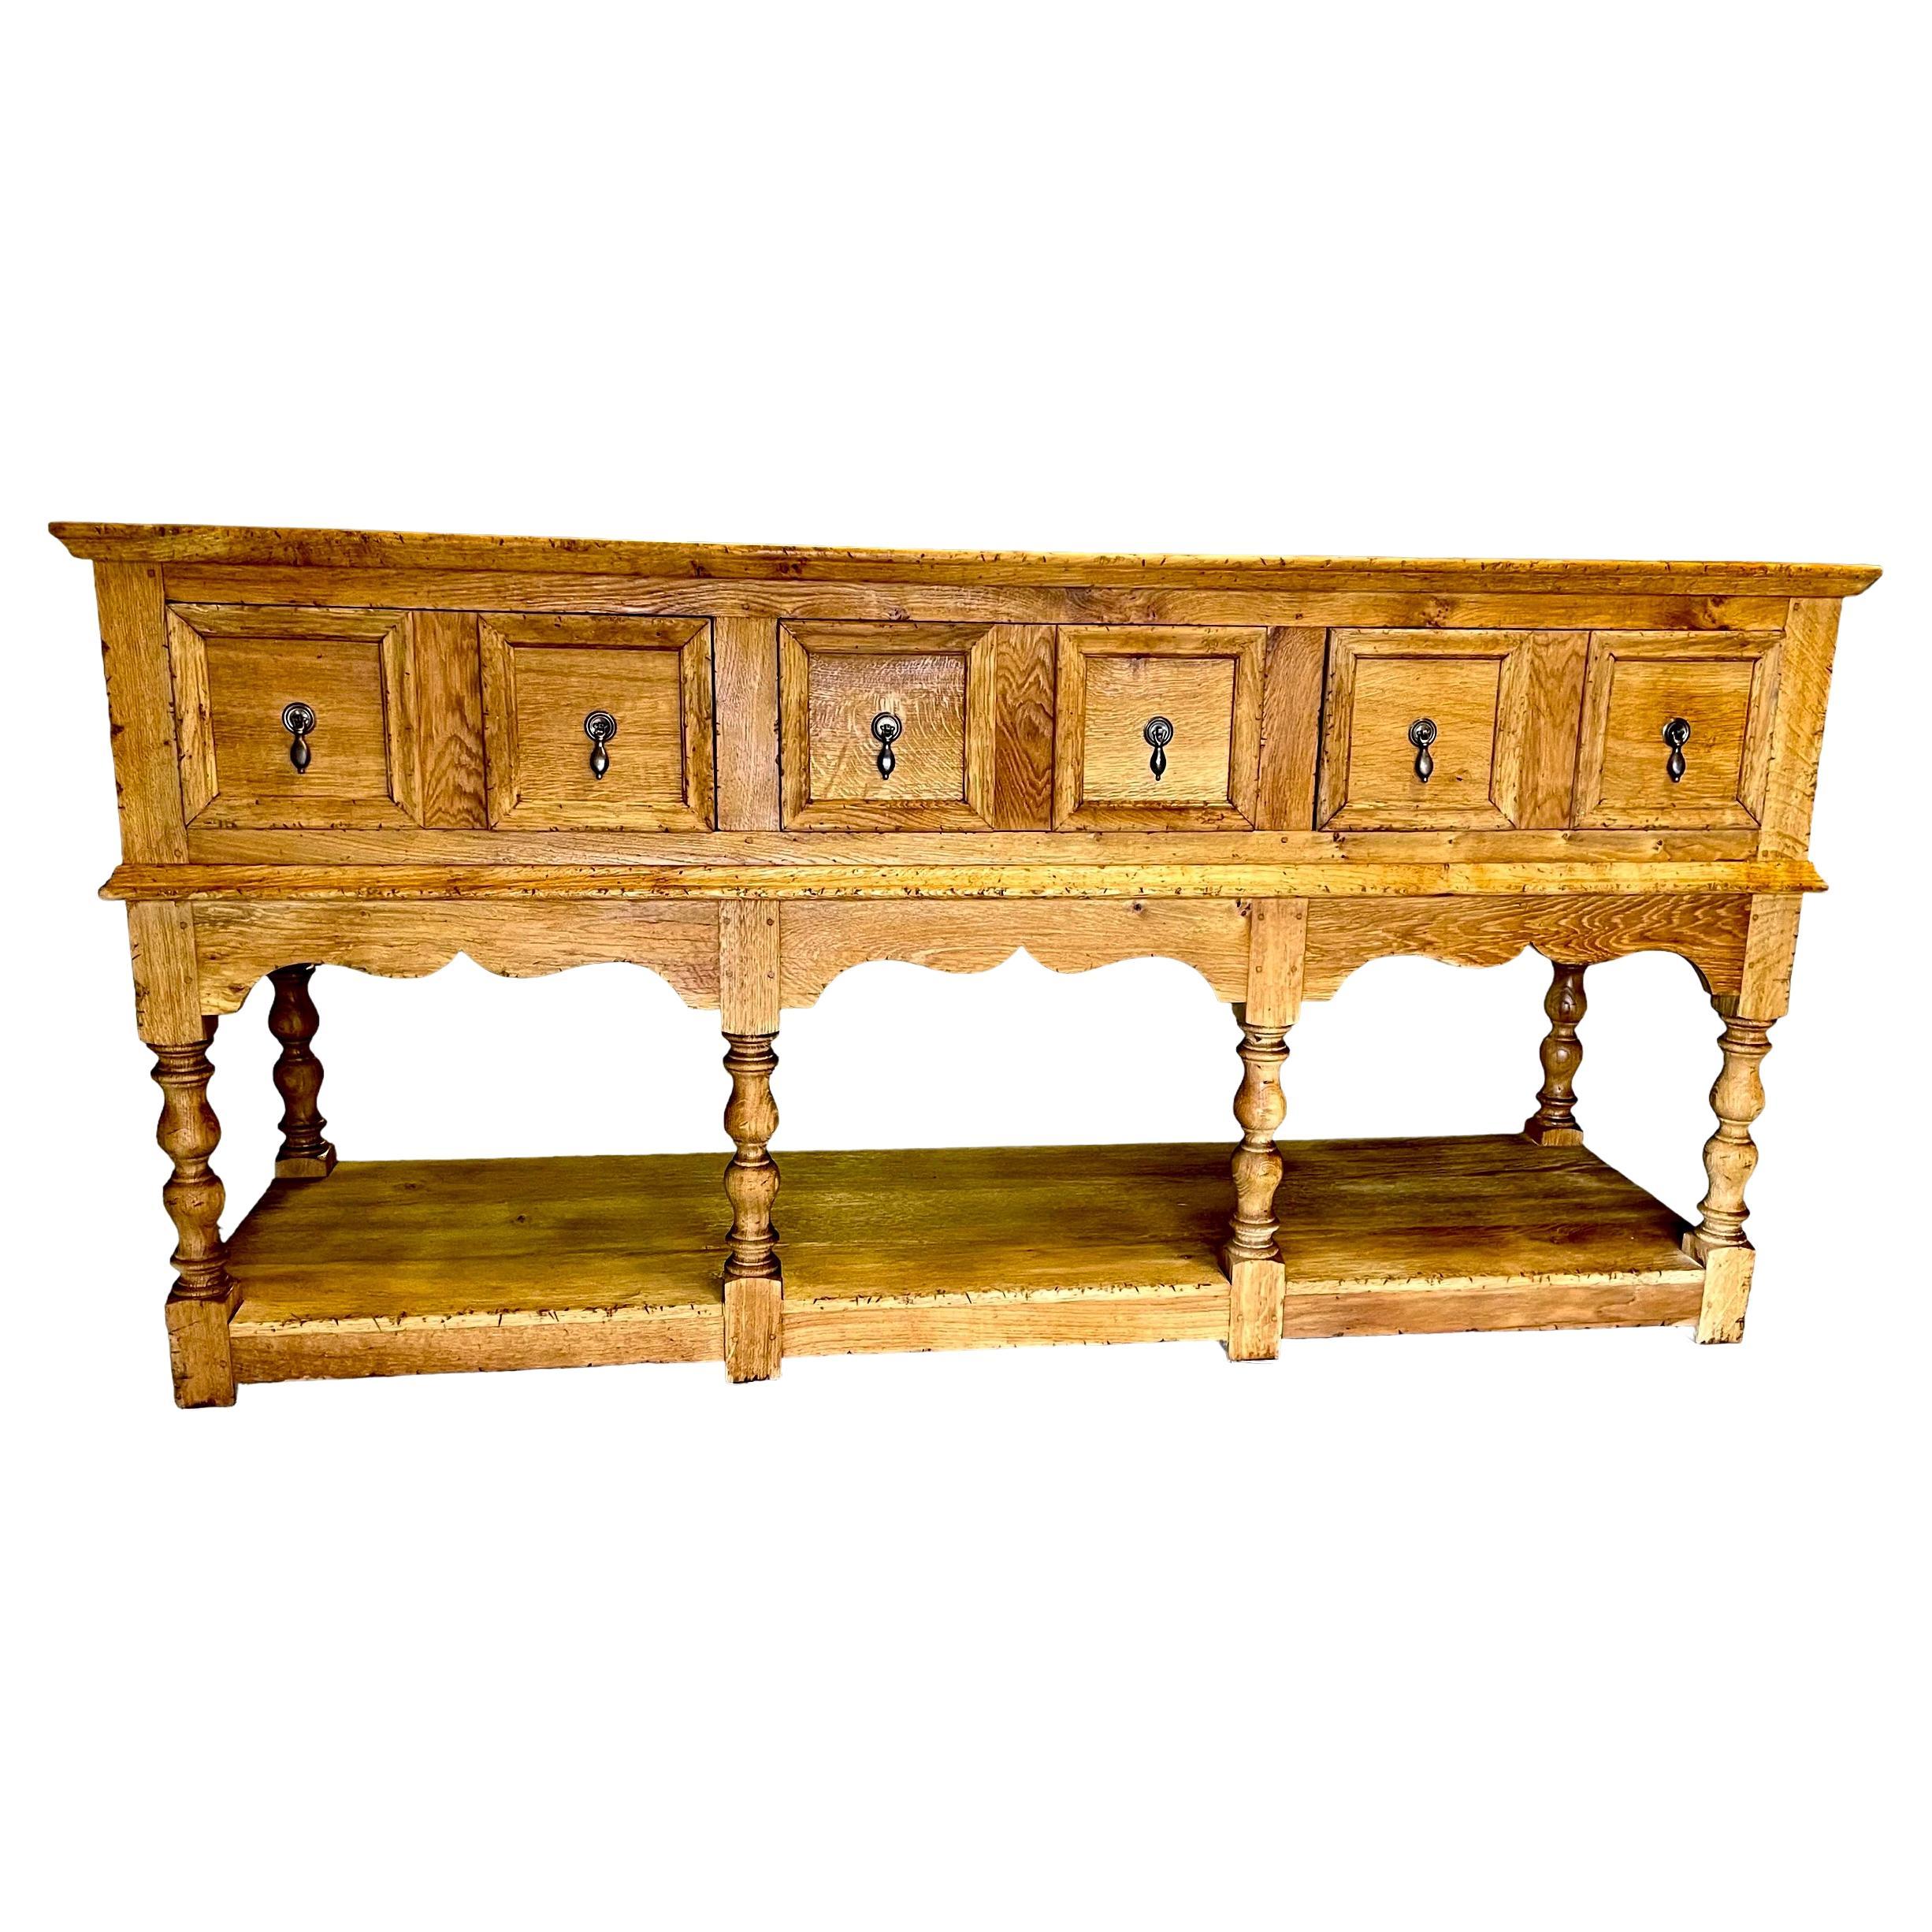 Jacobean Oak Sideboard Dresser Base with lower shelf.

English handmade in solid oak timber with turned legs,
with mitre cut drawer front moldings, shaped and panelled ends,
a solid oak back and solid oak drawer linings.

Offers great drawer storage